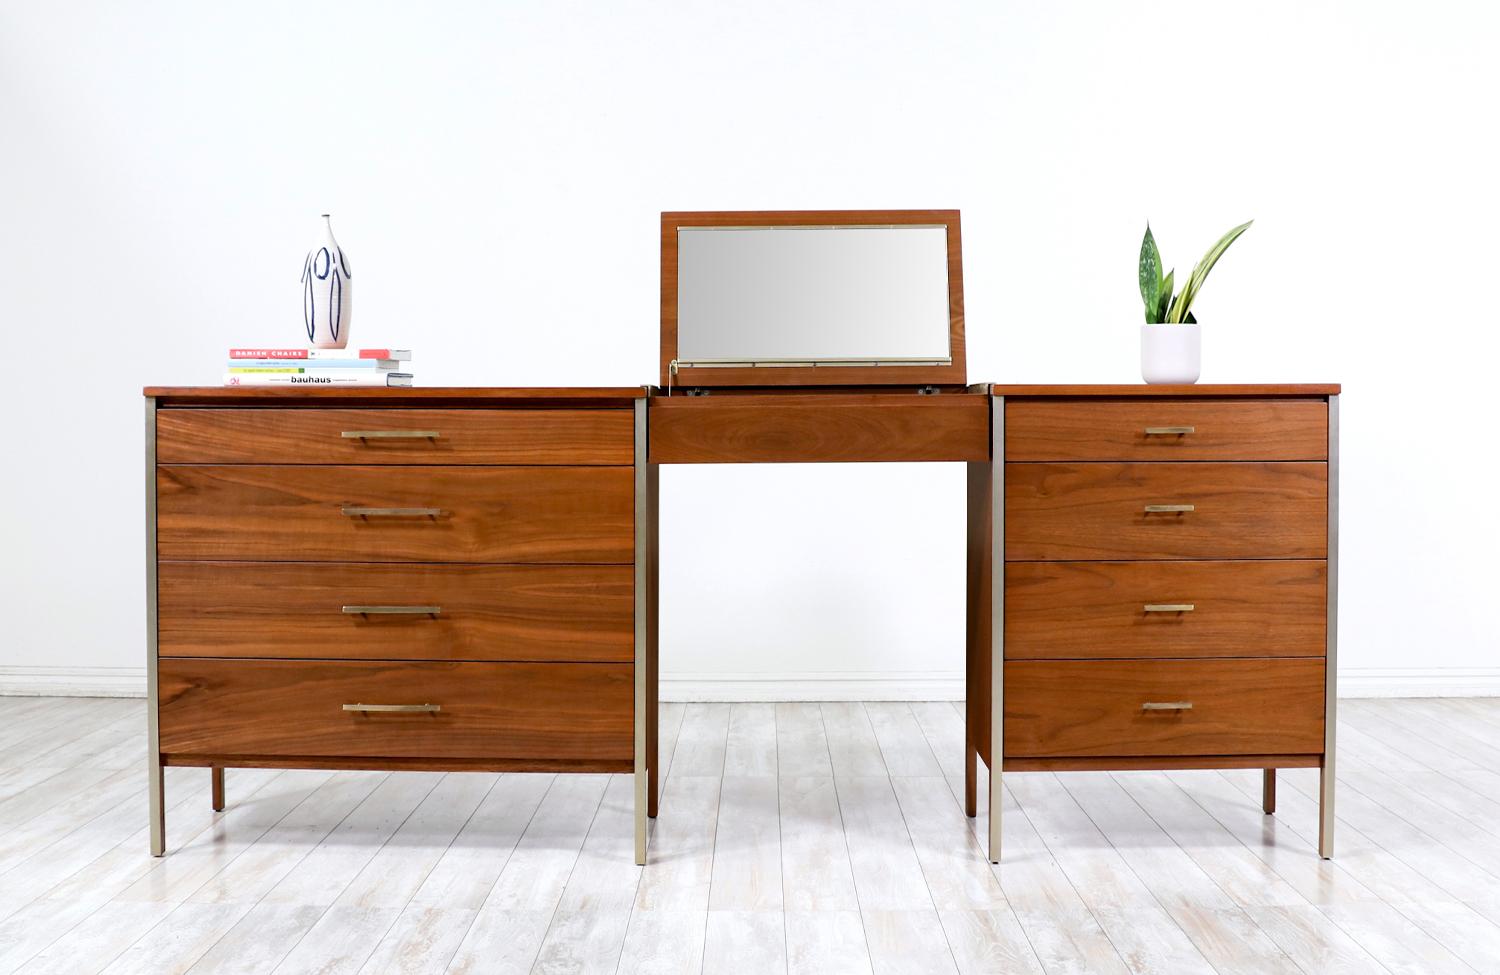 Introducing the Mid-Century Modern Dresser Set with Vanity by Paul McCobb for Calvin Furniture, a vintage gem that epitomizes enduring charm. Crafted in the 1950s, this set embodies the Mid-Century Modern style with its clean lines, minimalist